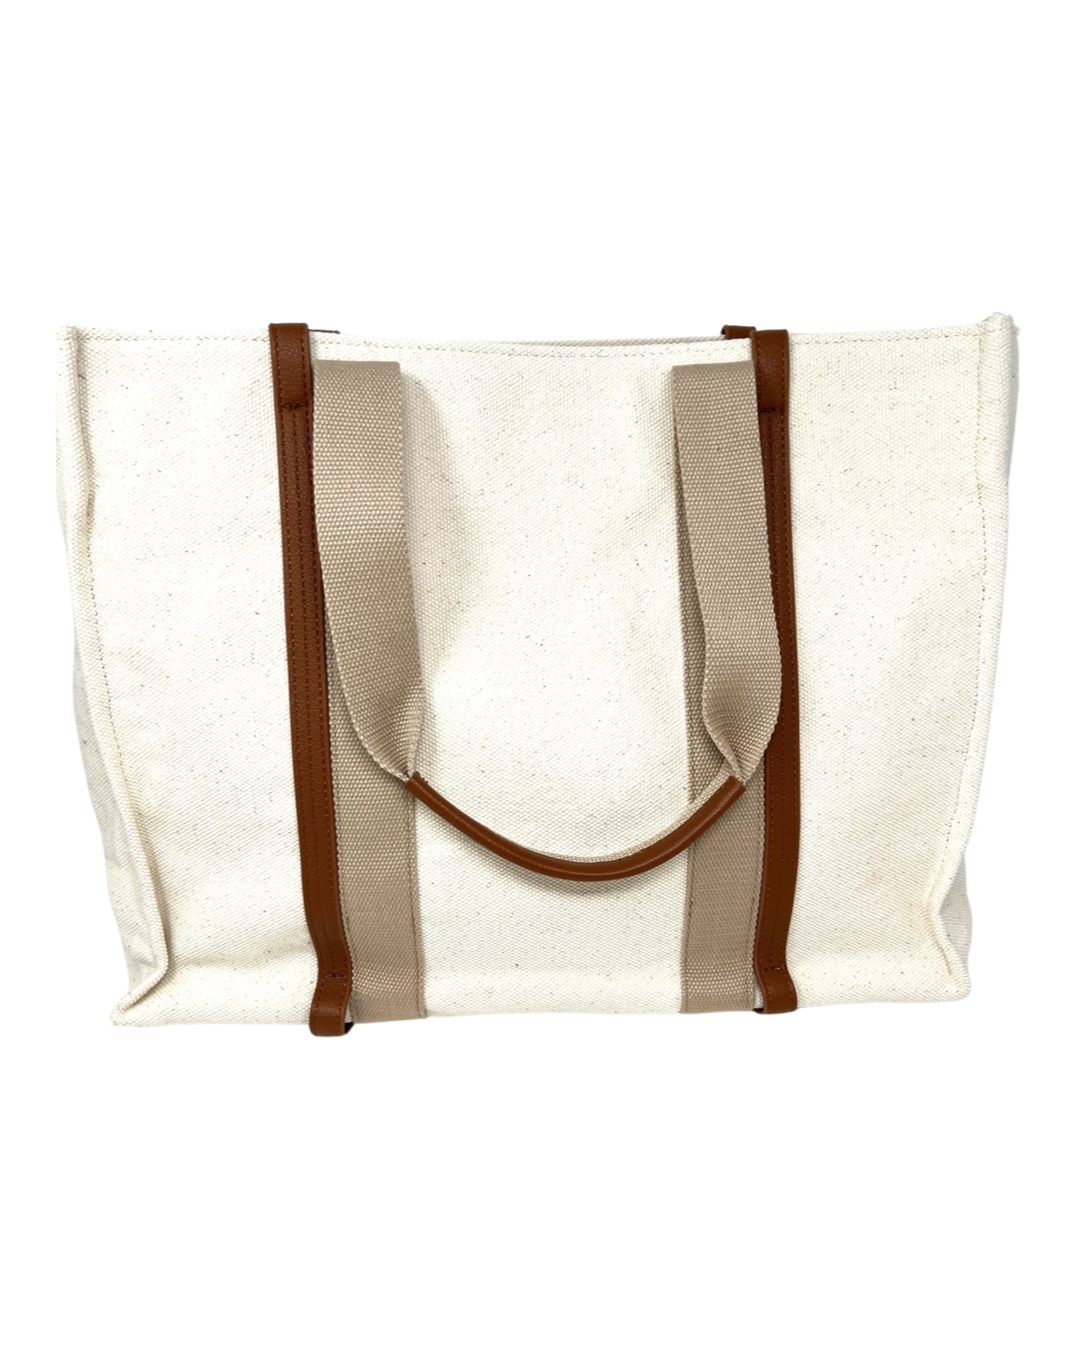 Chlo Chlo Canvas and Leather Tote in Cognac